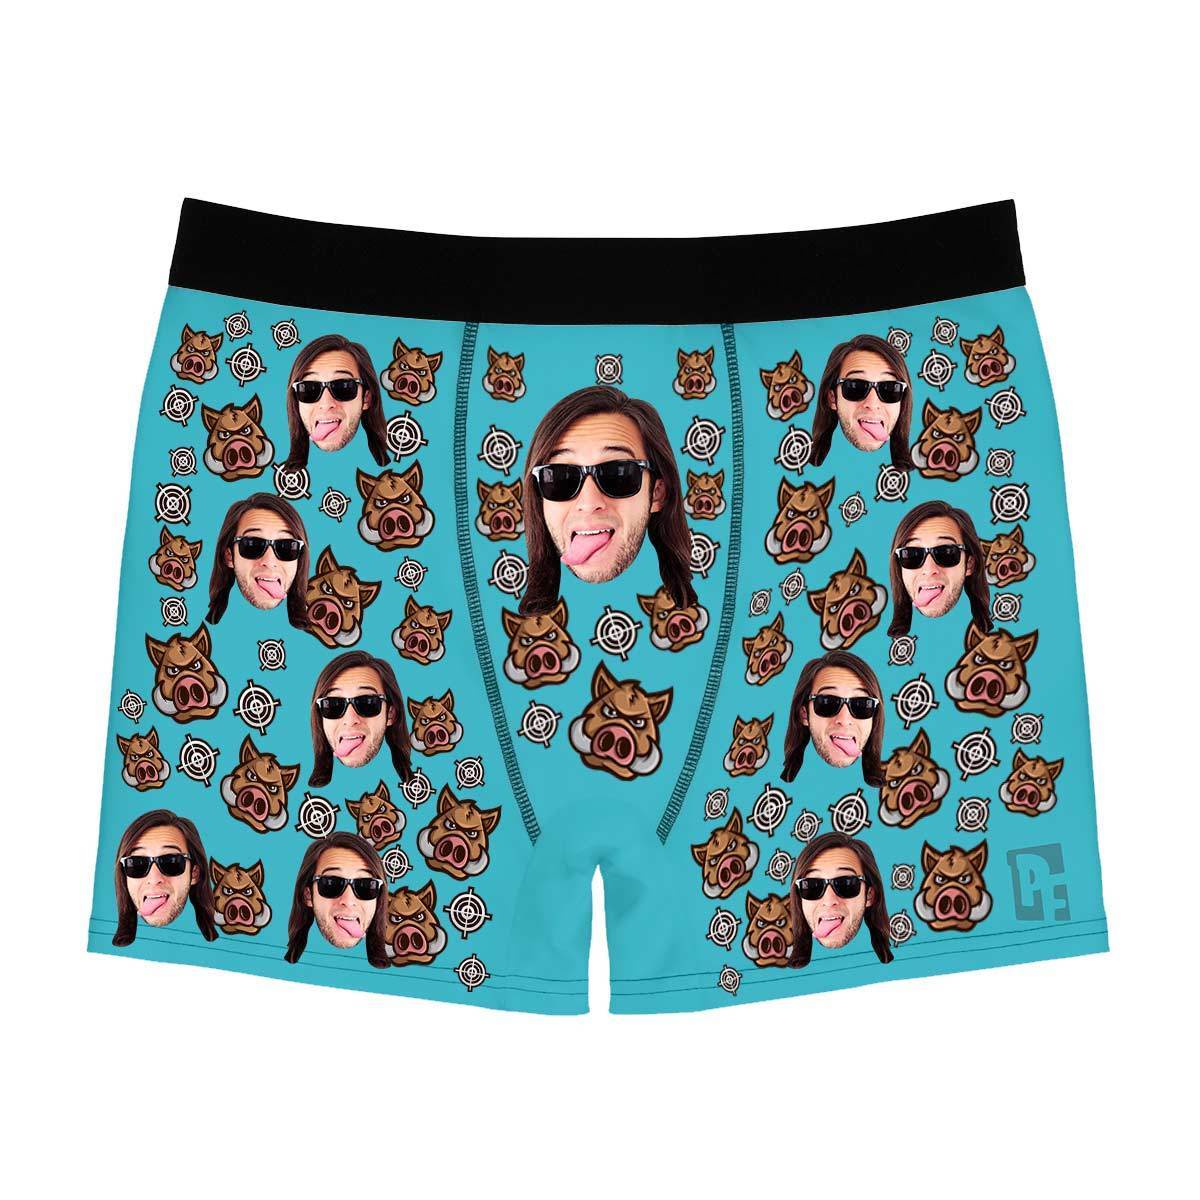 Blue Boar Hunter men's boxer briefs personalized with photo printed on them